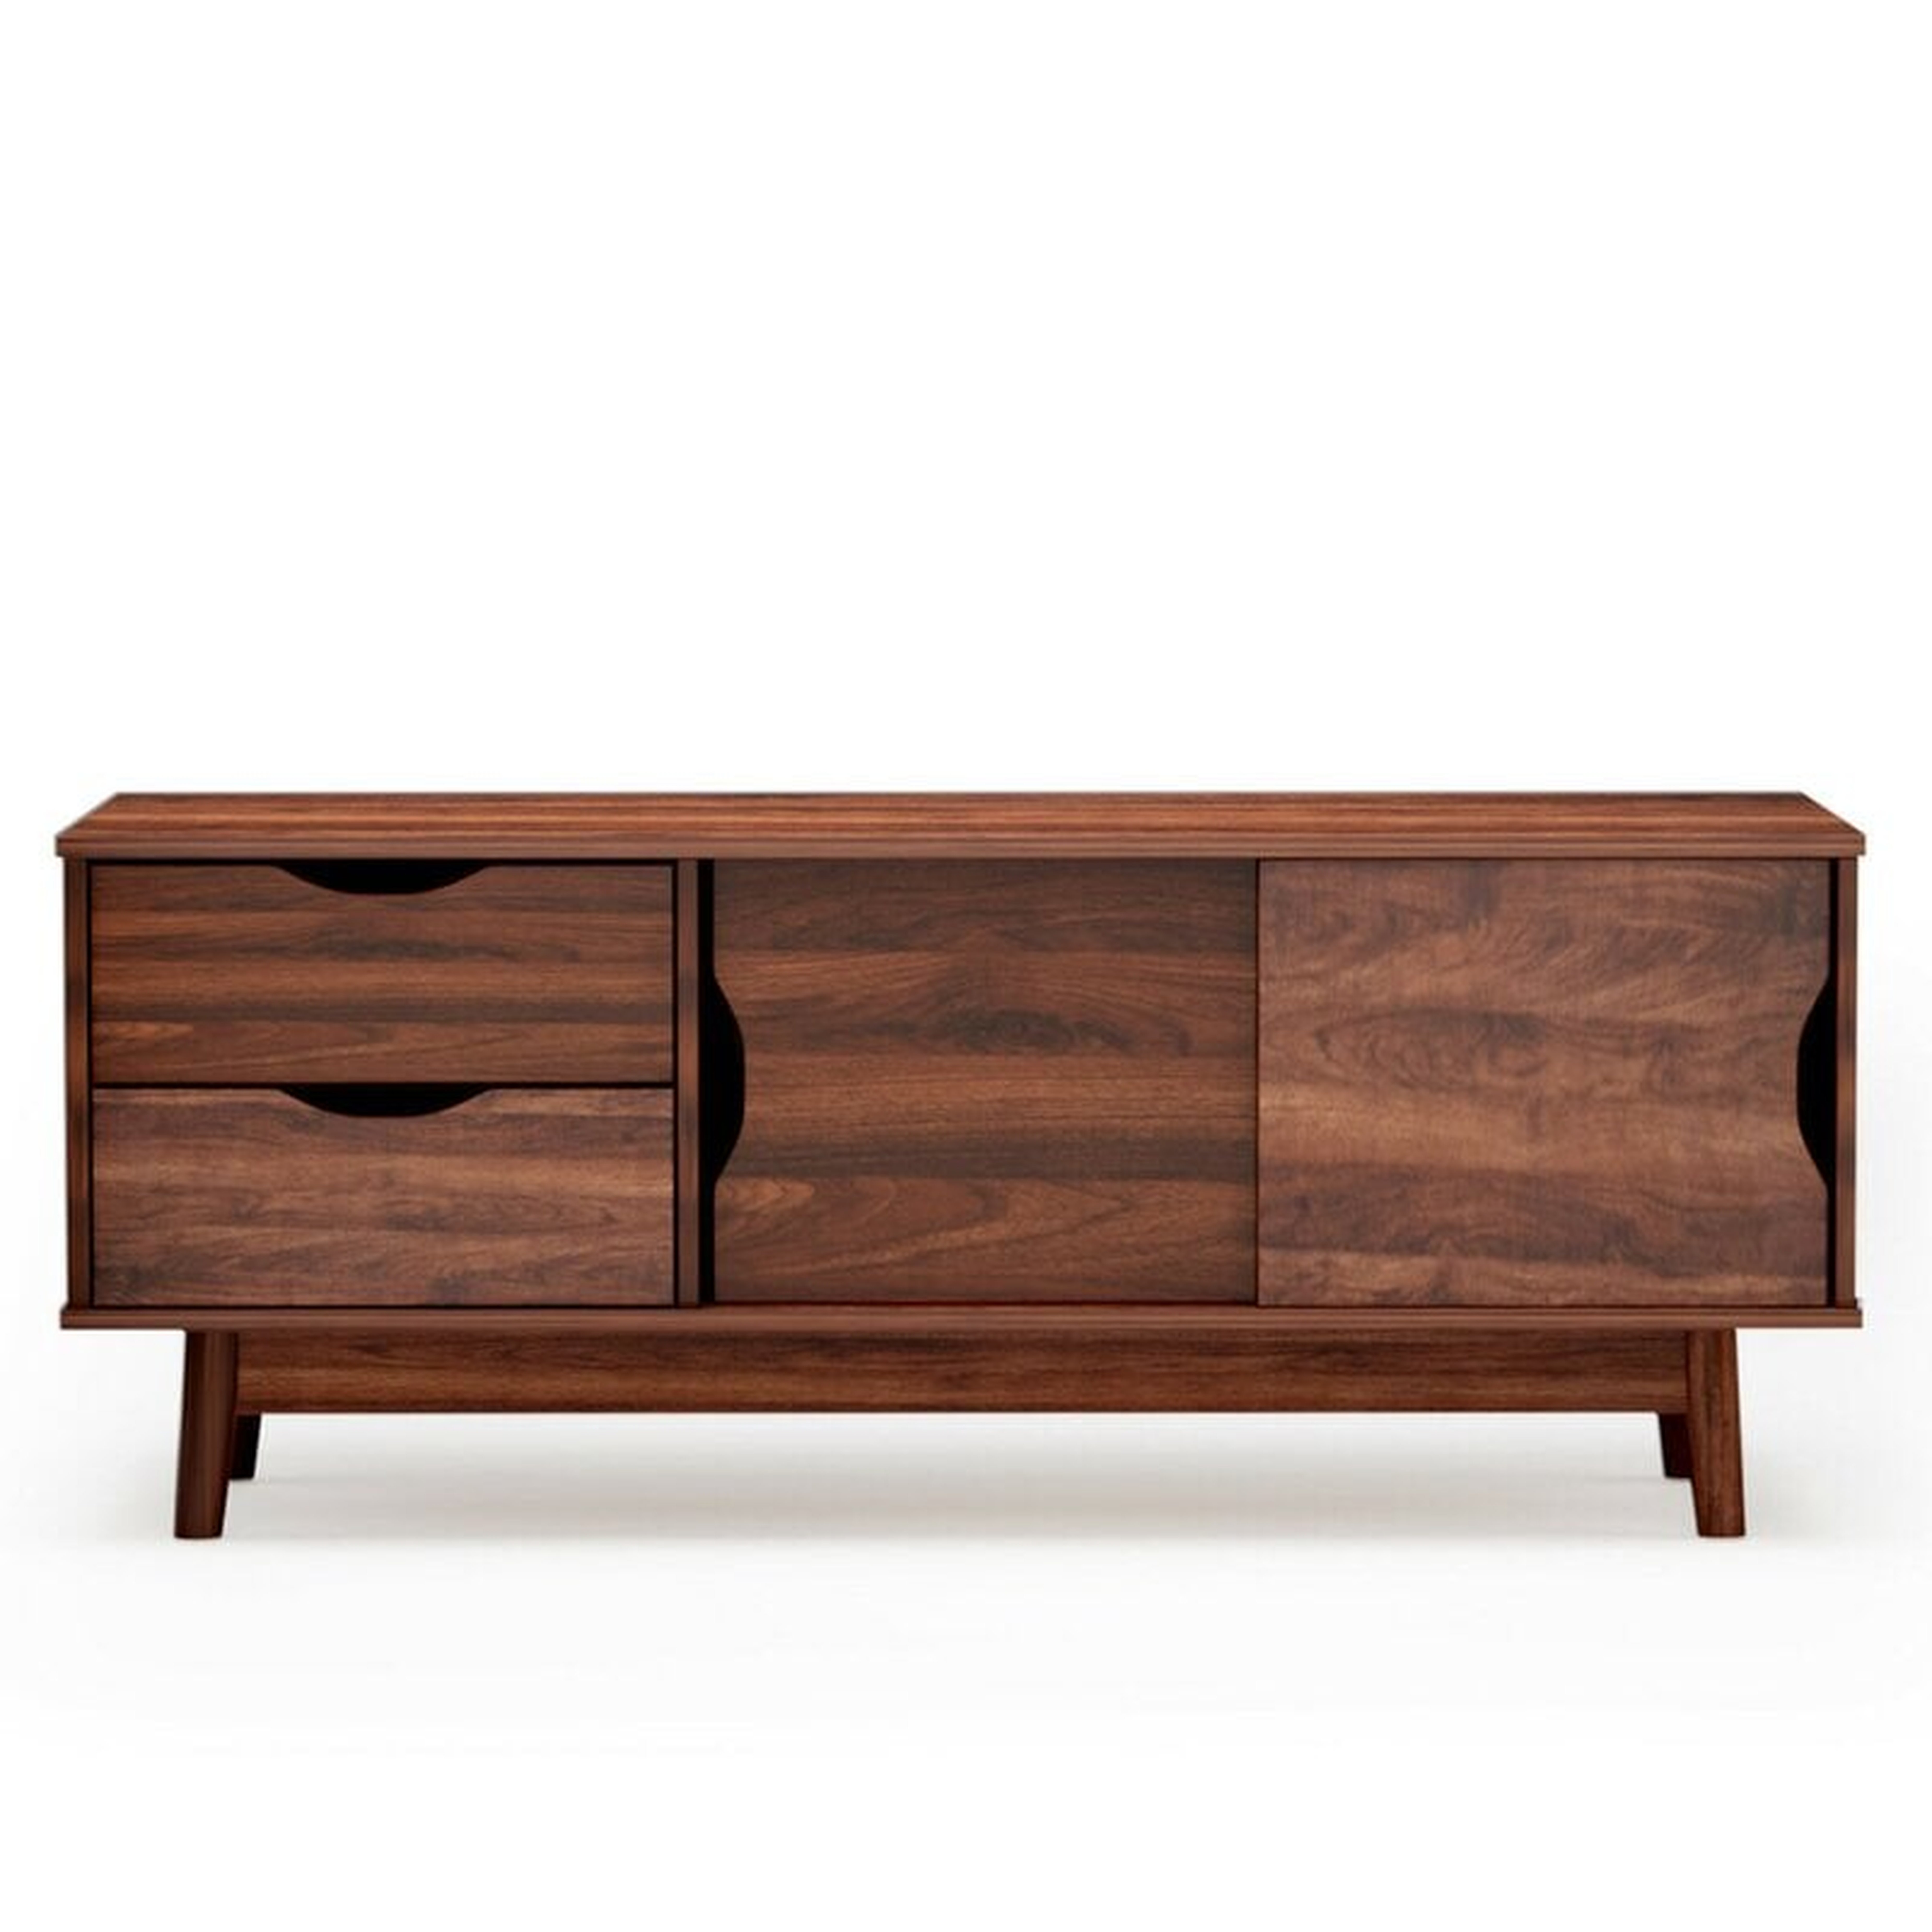 George Oliver Tv Stand For Tv Up To 50'' Media Console Table Storage With Doors Walnut - Wayfair